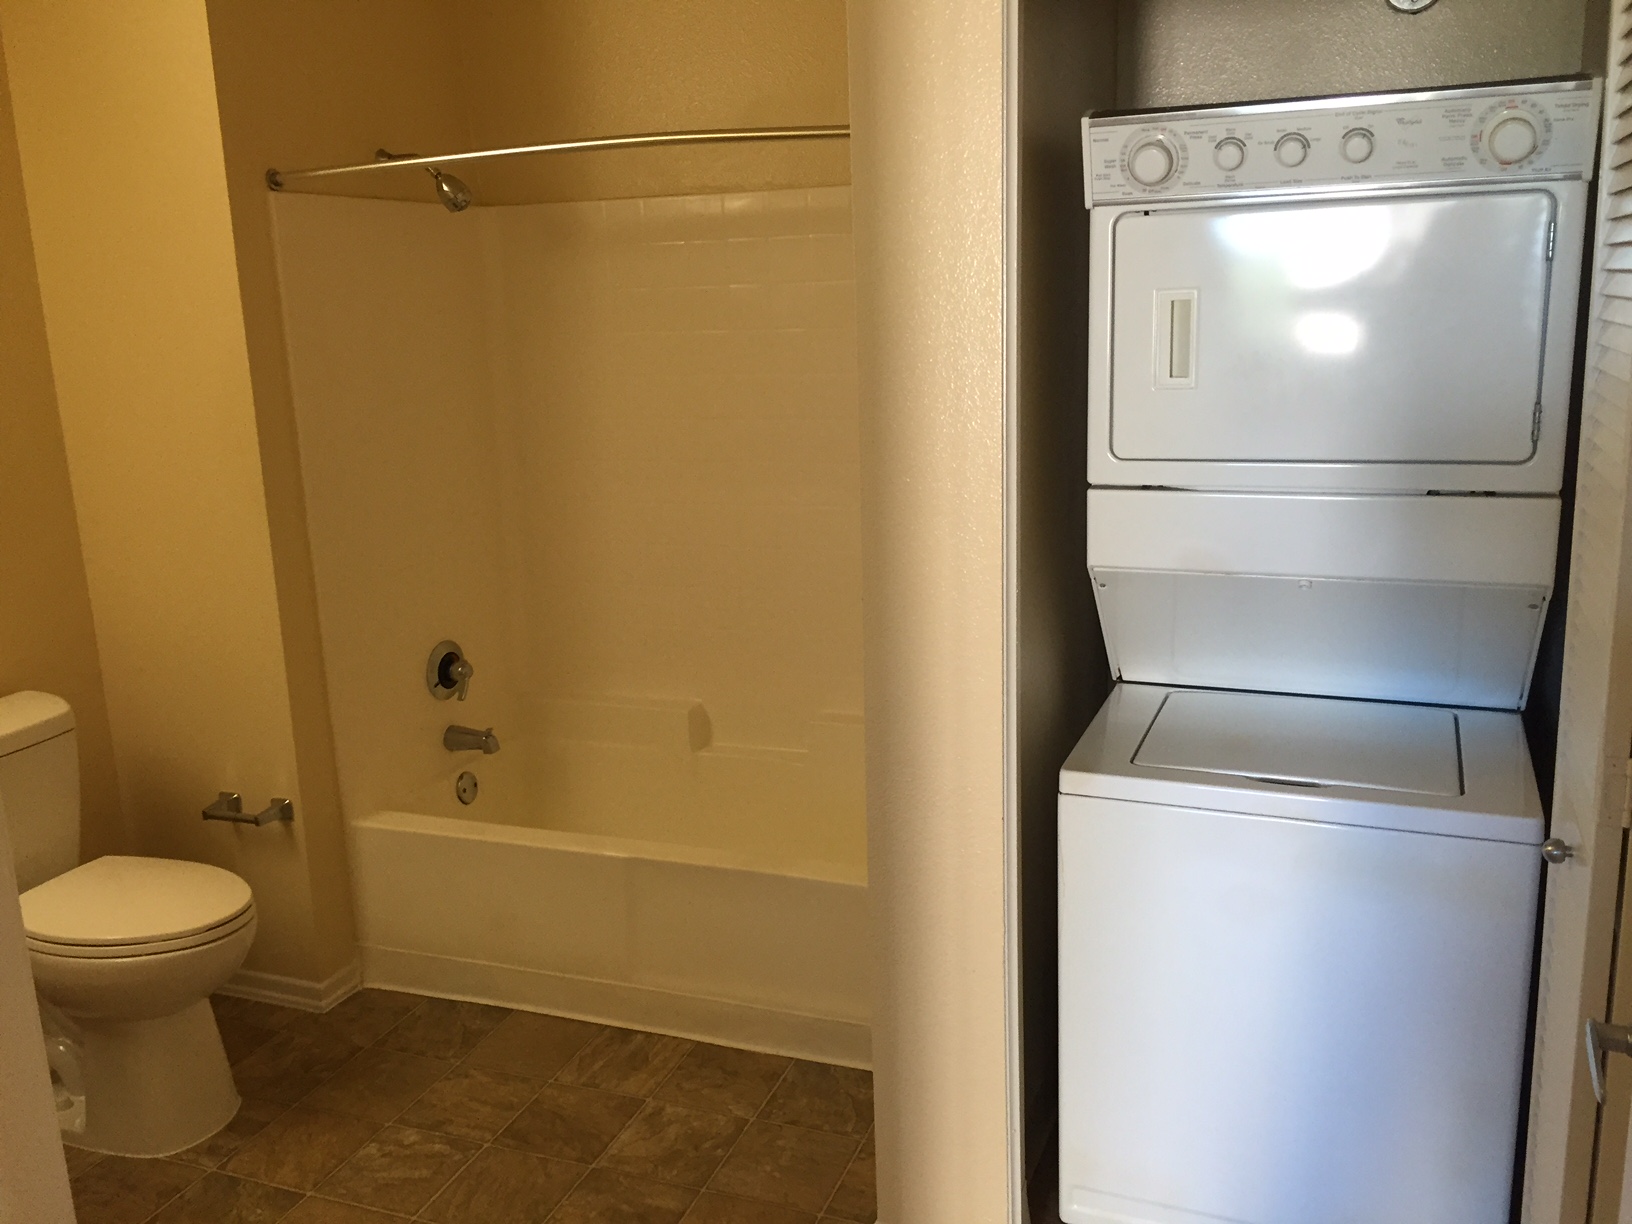 Front view of a bathroom, white toilet and white tub, shower rod without a curtain, empty toilet paper holder, a compact white two in one washer and dryer machine on the right.